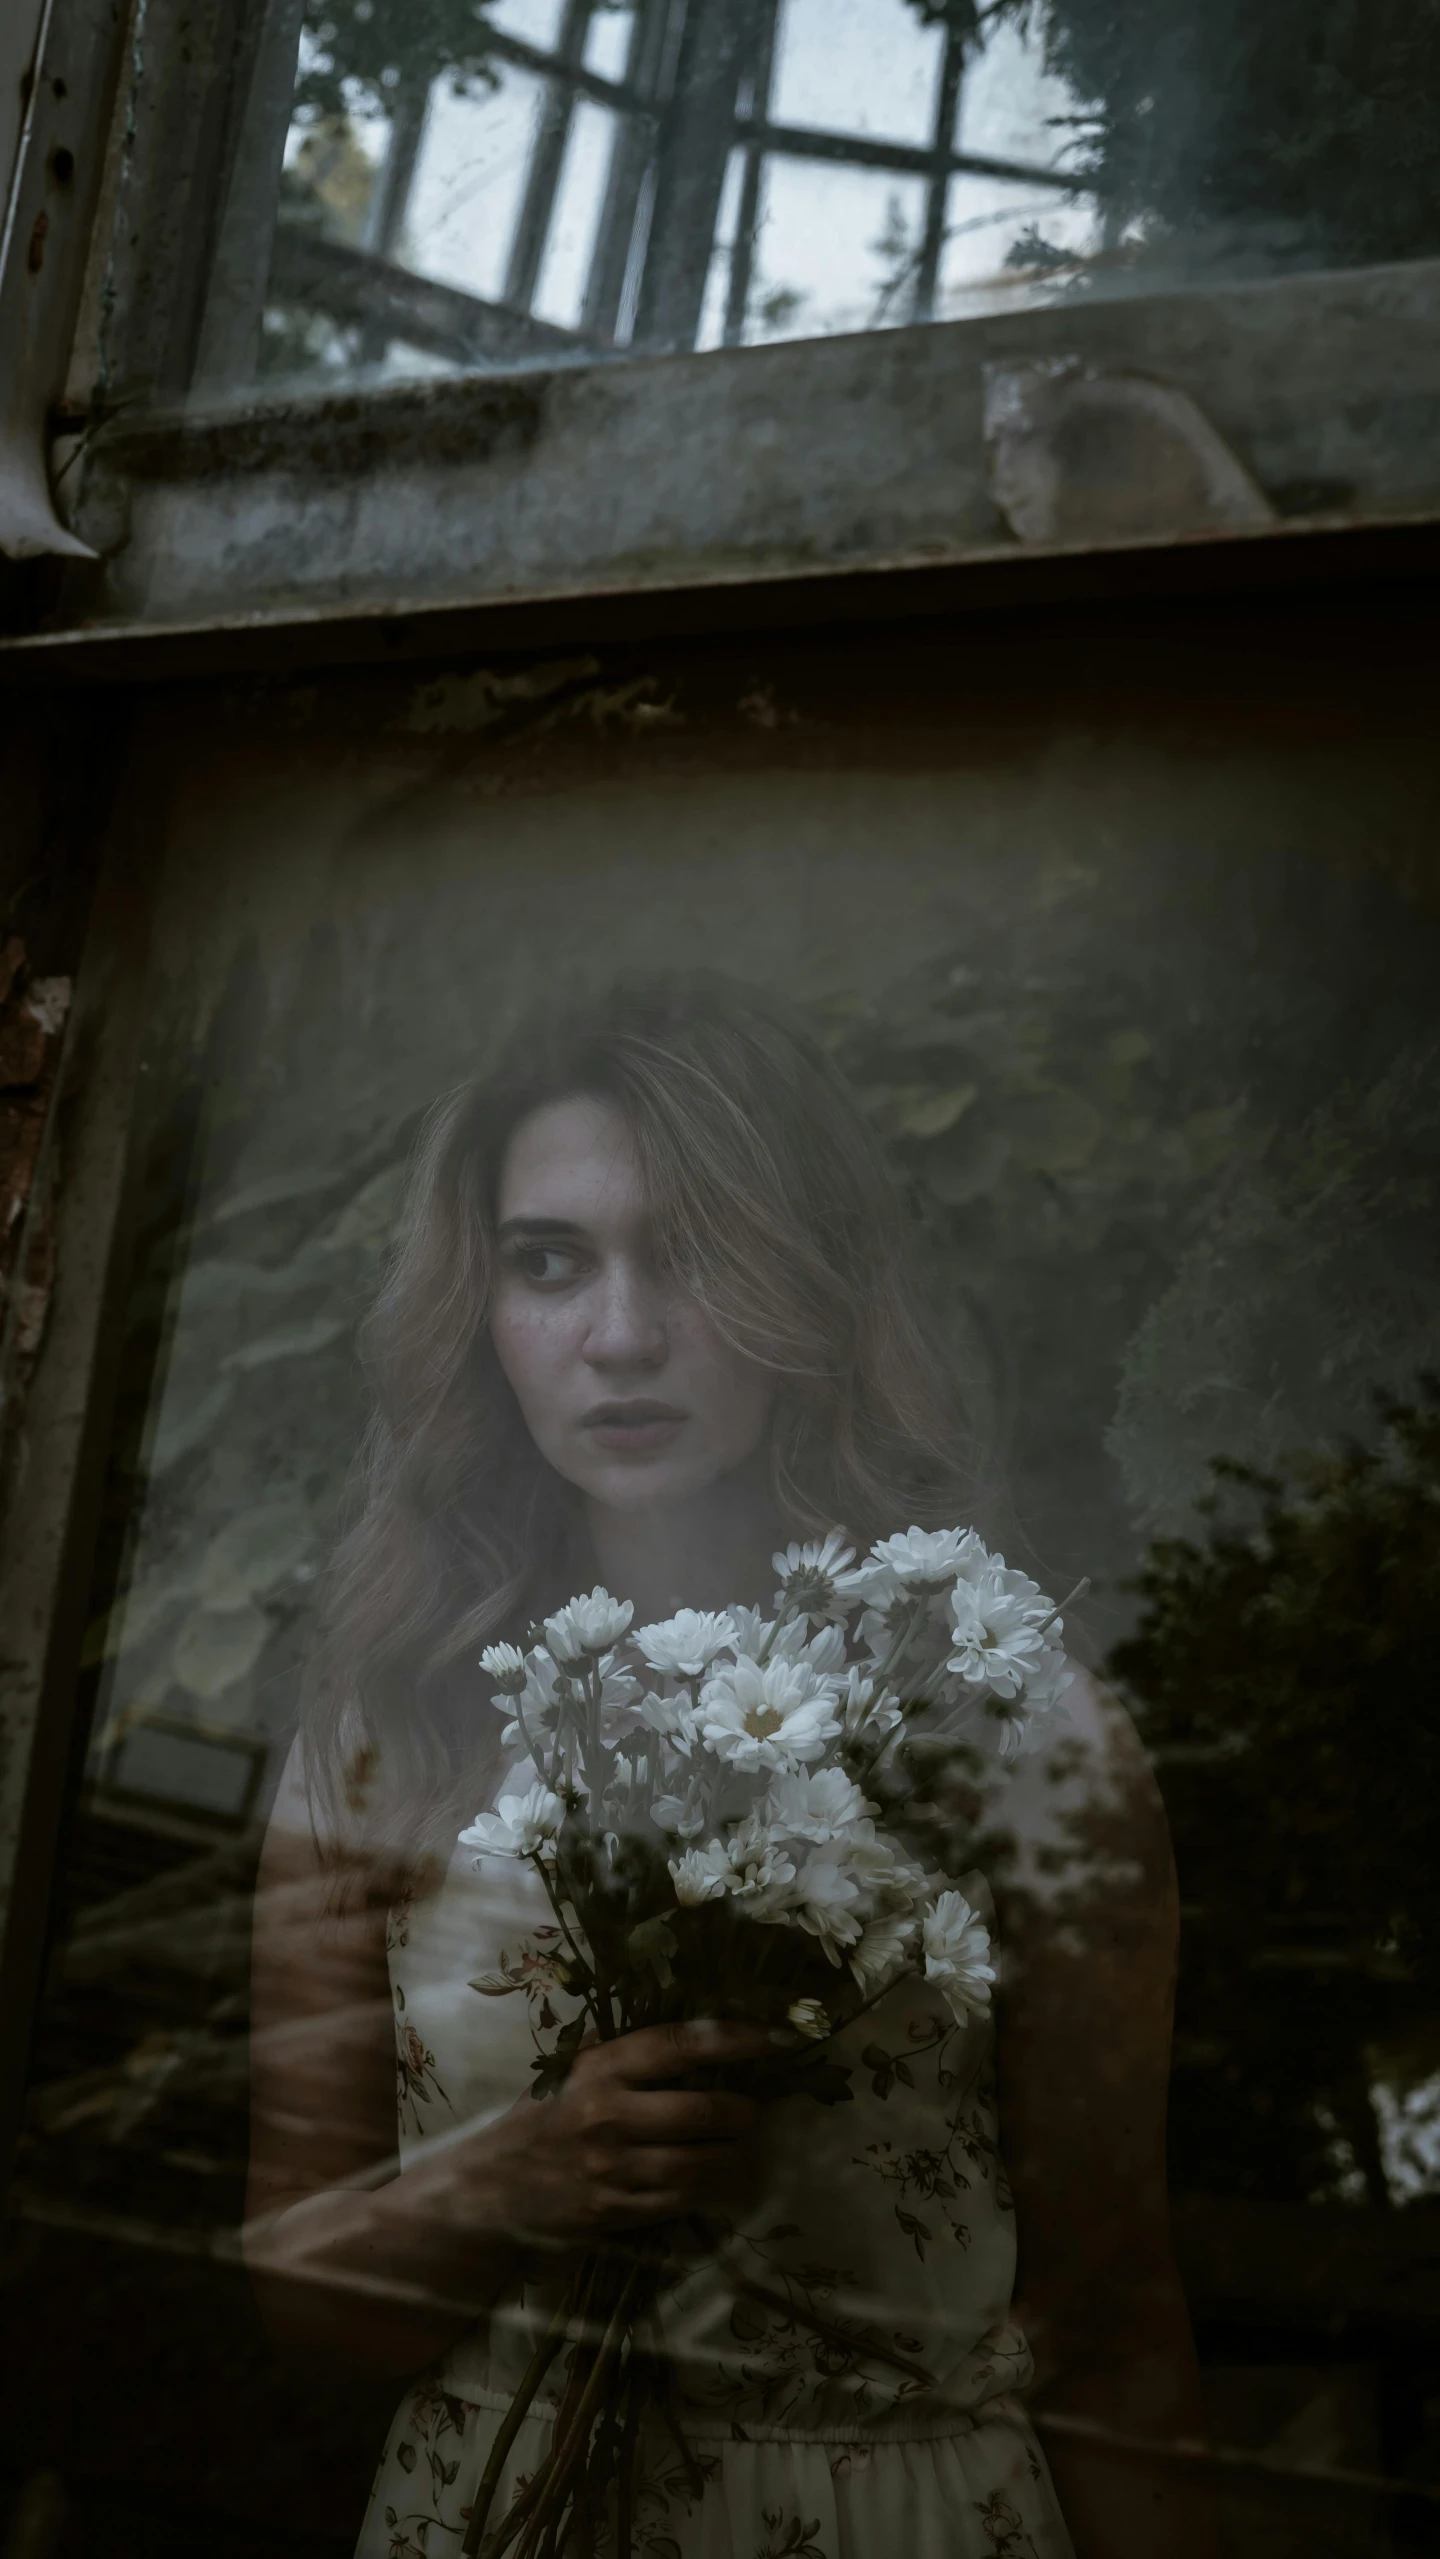 a woman is shown through a window with white flowers in her hands